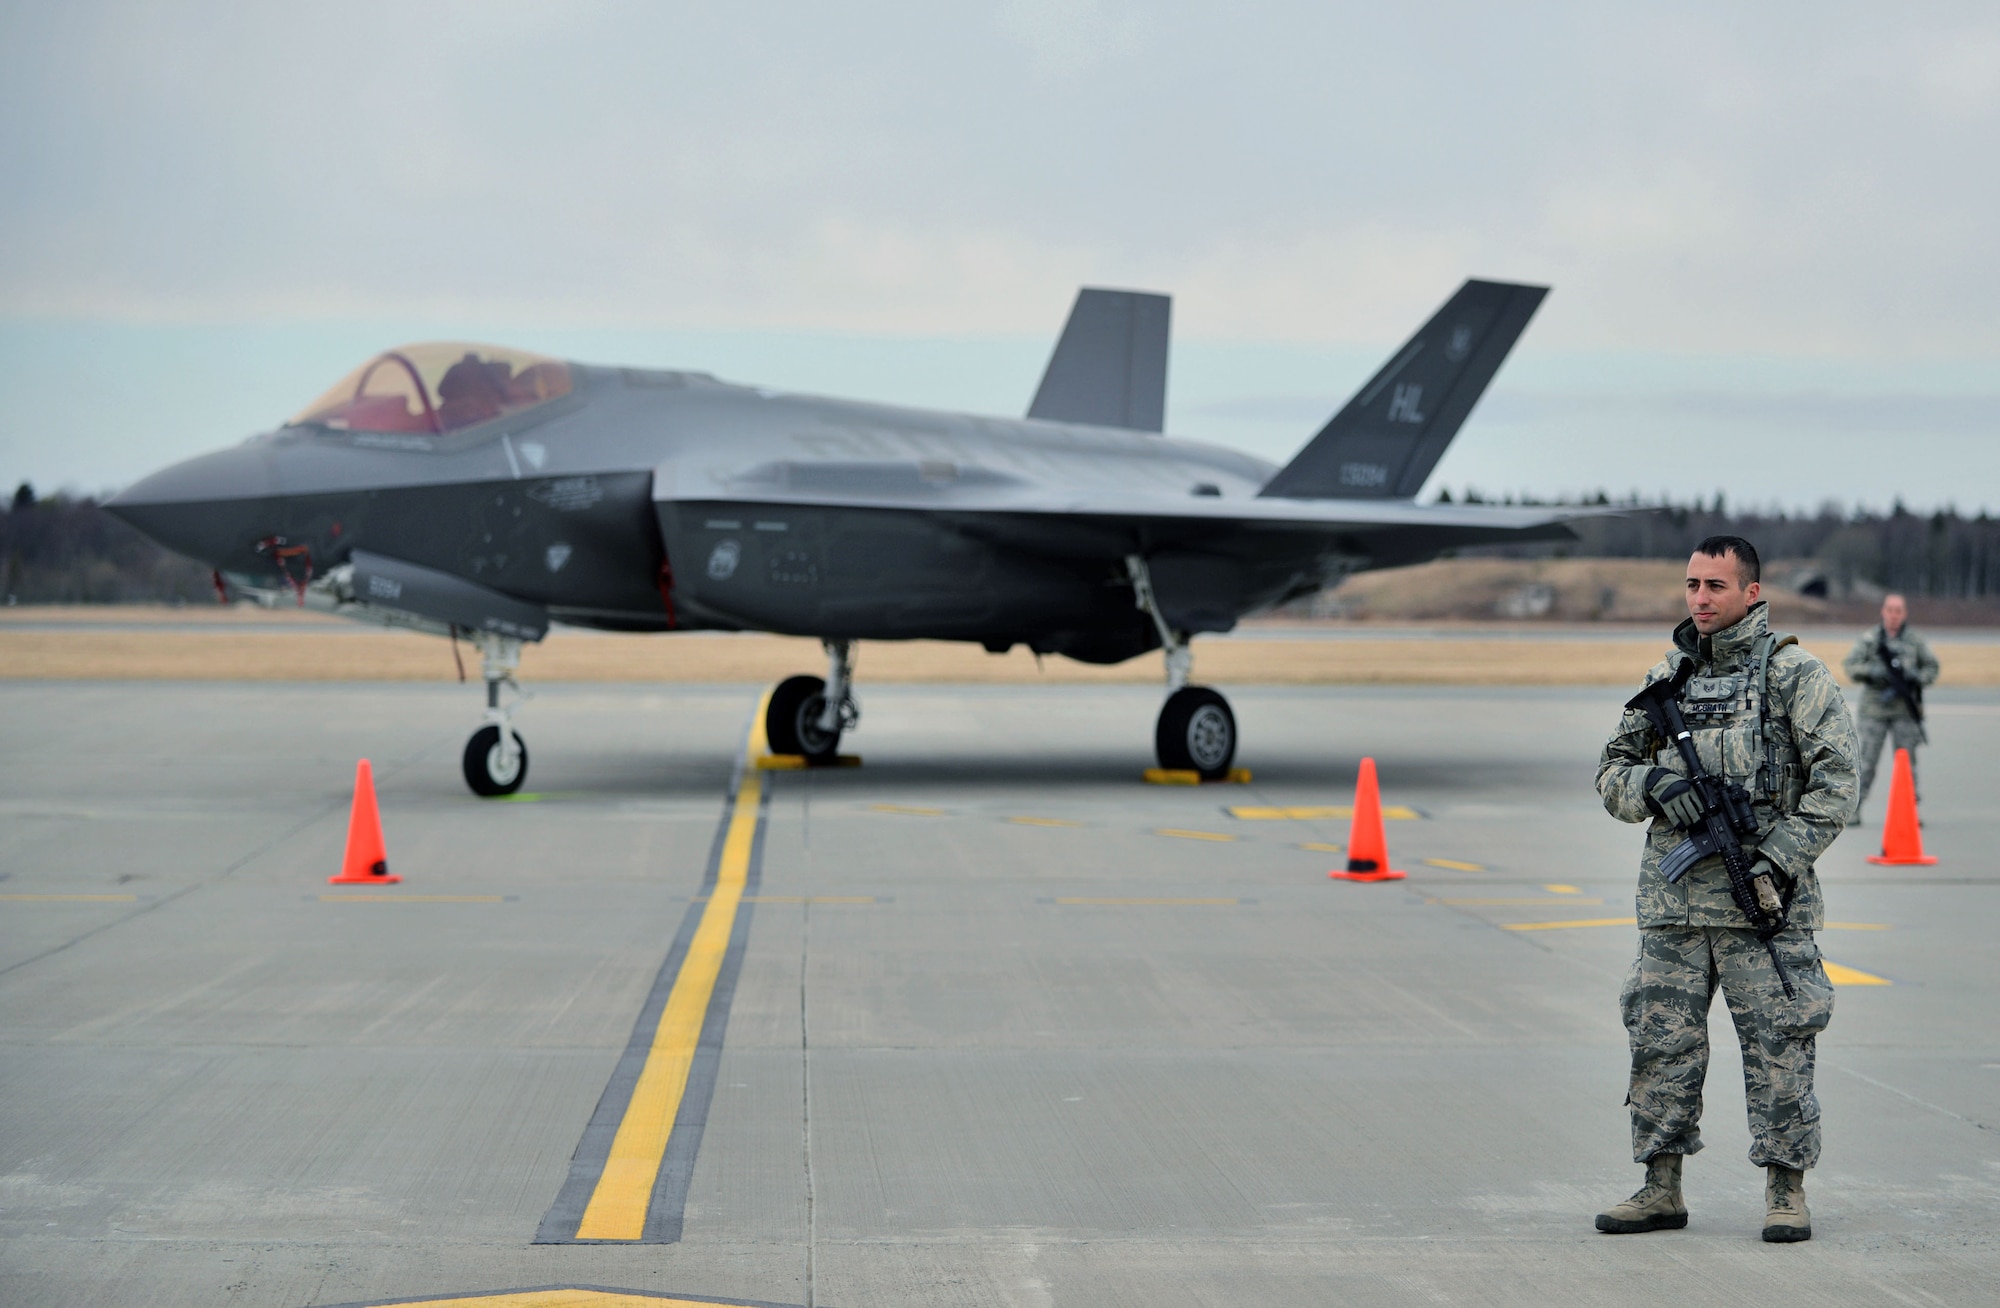 Staff Sgt. Joseph McGrath, 419th Security Forces Squadron, stands beside an F-35A Lightning II at Amari Air Base, Estonia. SFS personnel provided security this week for the aircraft’s arrival in the country, which is one of several stops for the F-35 during its first European deployment. Eight jets and about 250 personnel from the Air Force Reserve 419th Fighter Wing and active duty 388th FW at Hill Air Force Base, Utah, are in Europe for several weeks and will travel to multiple NATO bases in an effort to maximize training opportunities and demonstrate U.S. support to NATO. (U.S. Air Force photo/Micah Garbarino)